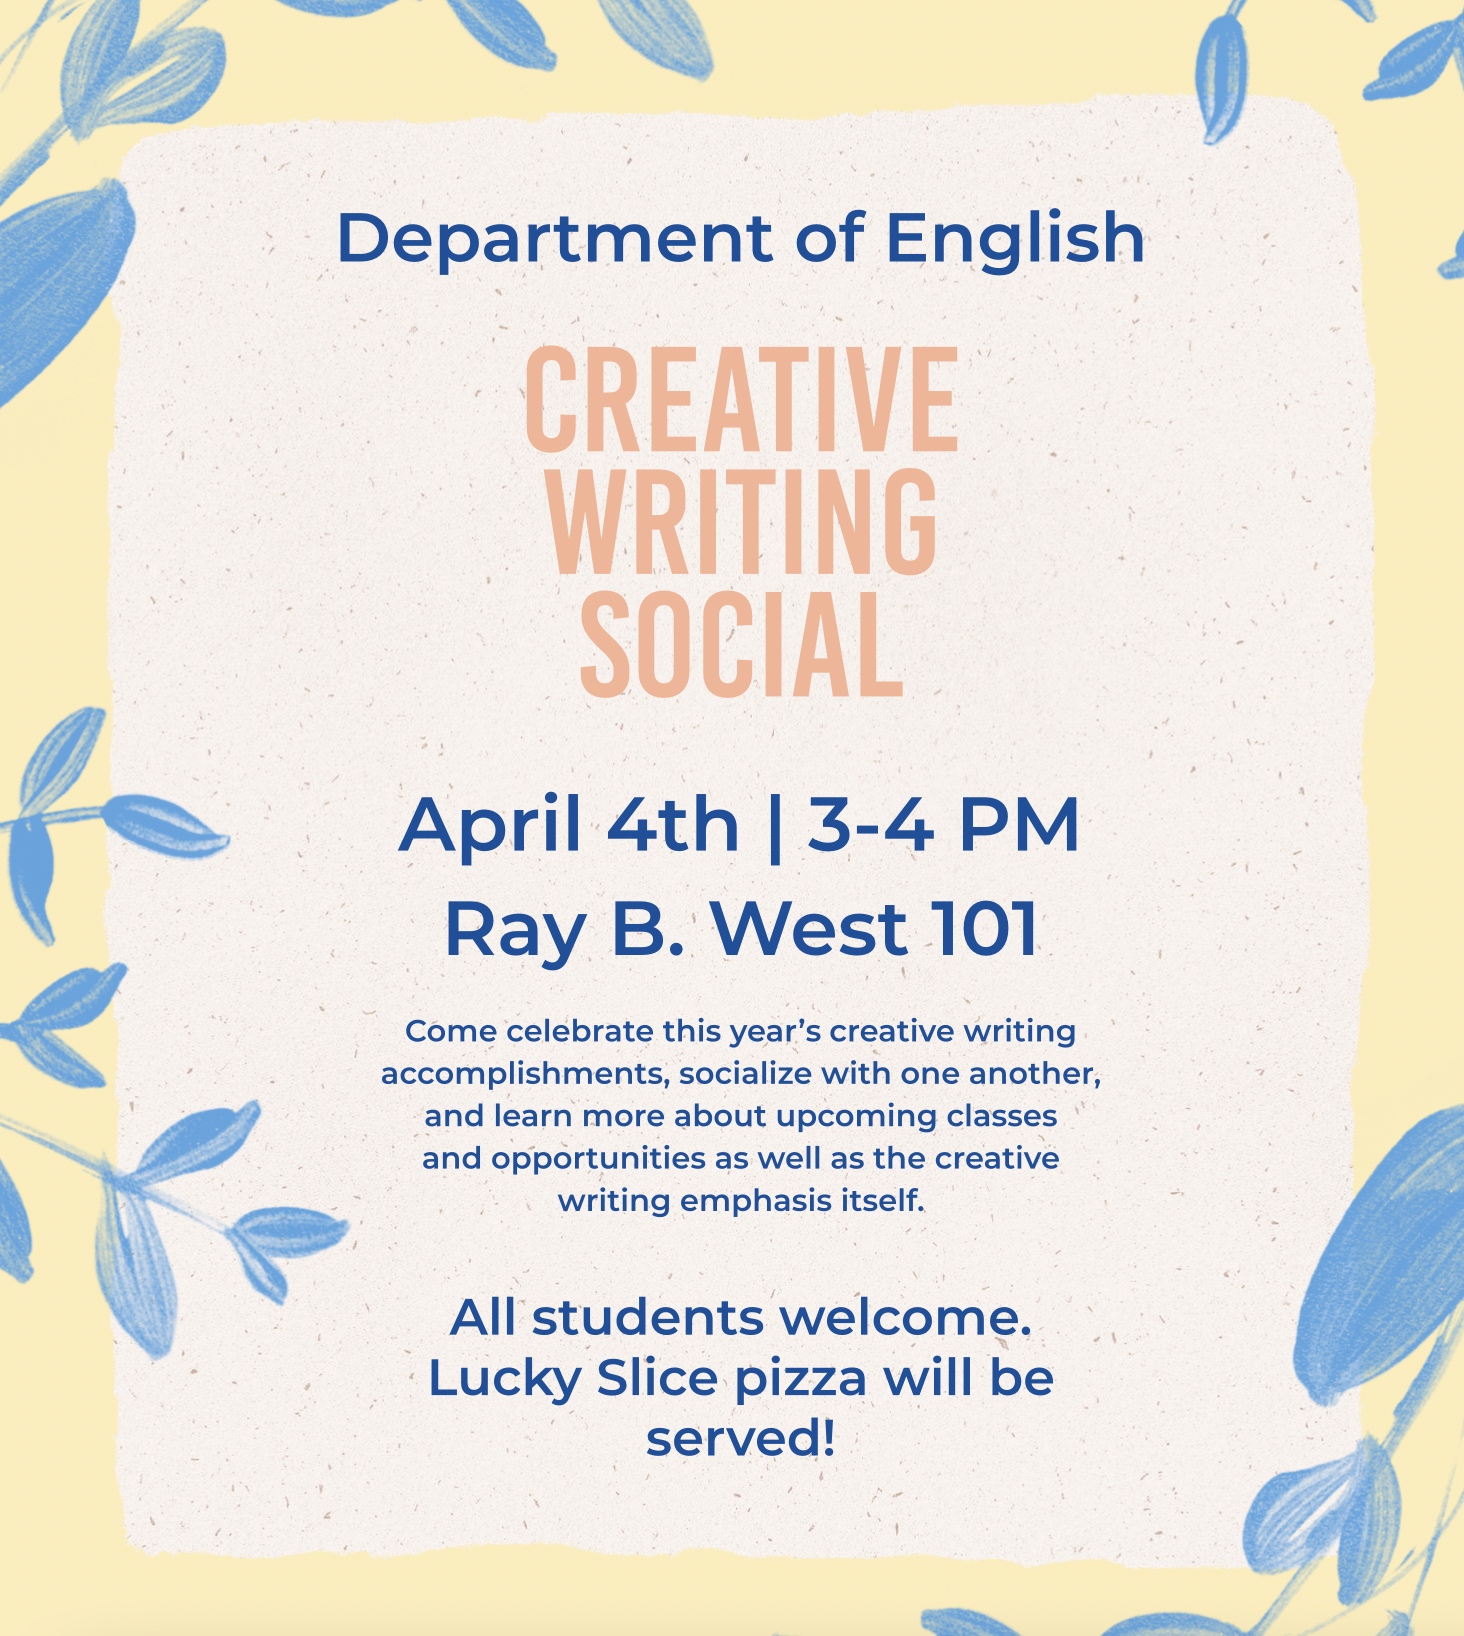 Join us for the Creative Writing Social!   April 4th from 3:00-4:00pm on USU's campus in Ray B. West 101  Come celebrate this year's creative writing accomplishments, socialize with on another, and learn more about upcoming classes and opportunities as well as the creative writing emphasis.   All students welcome. Lucky Slice pizza will be served!